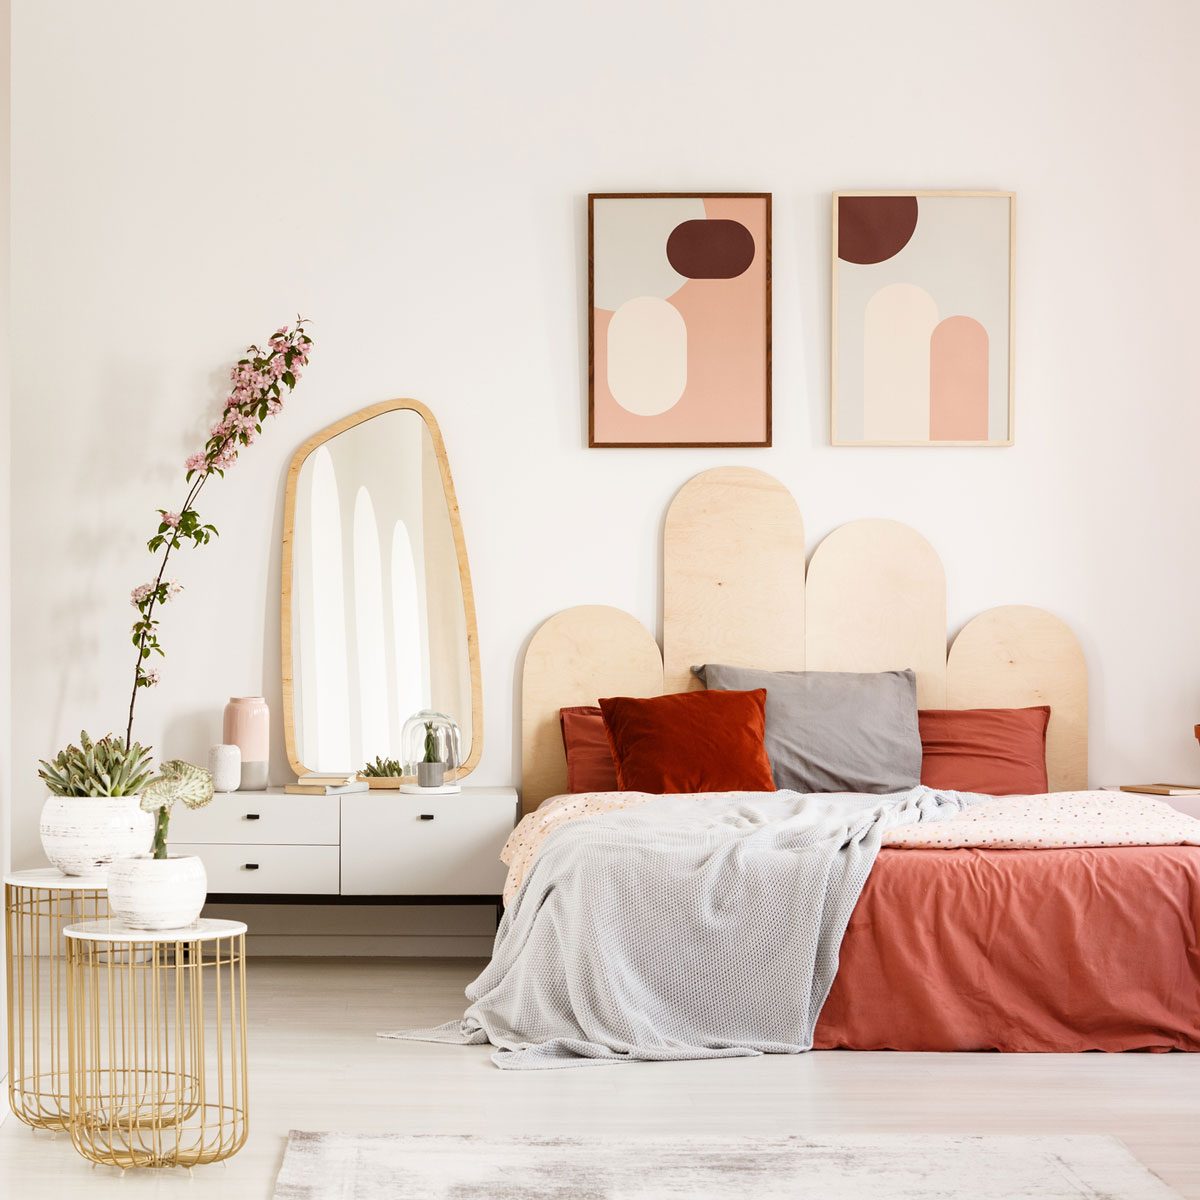 Bedroom with desert-inspired colors